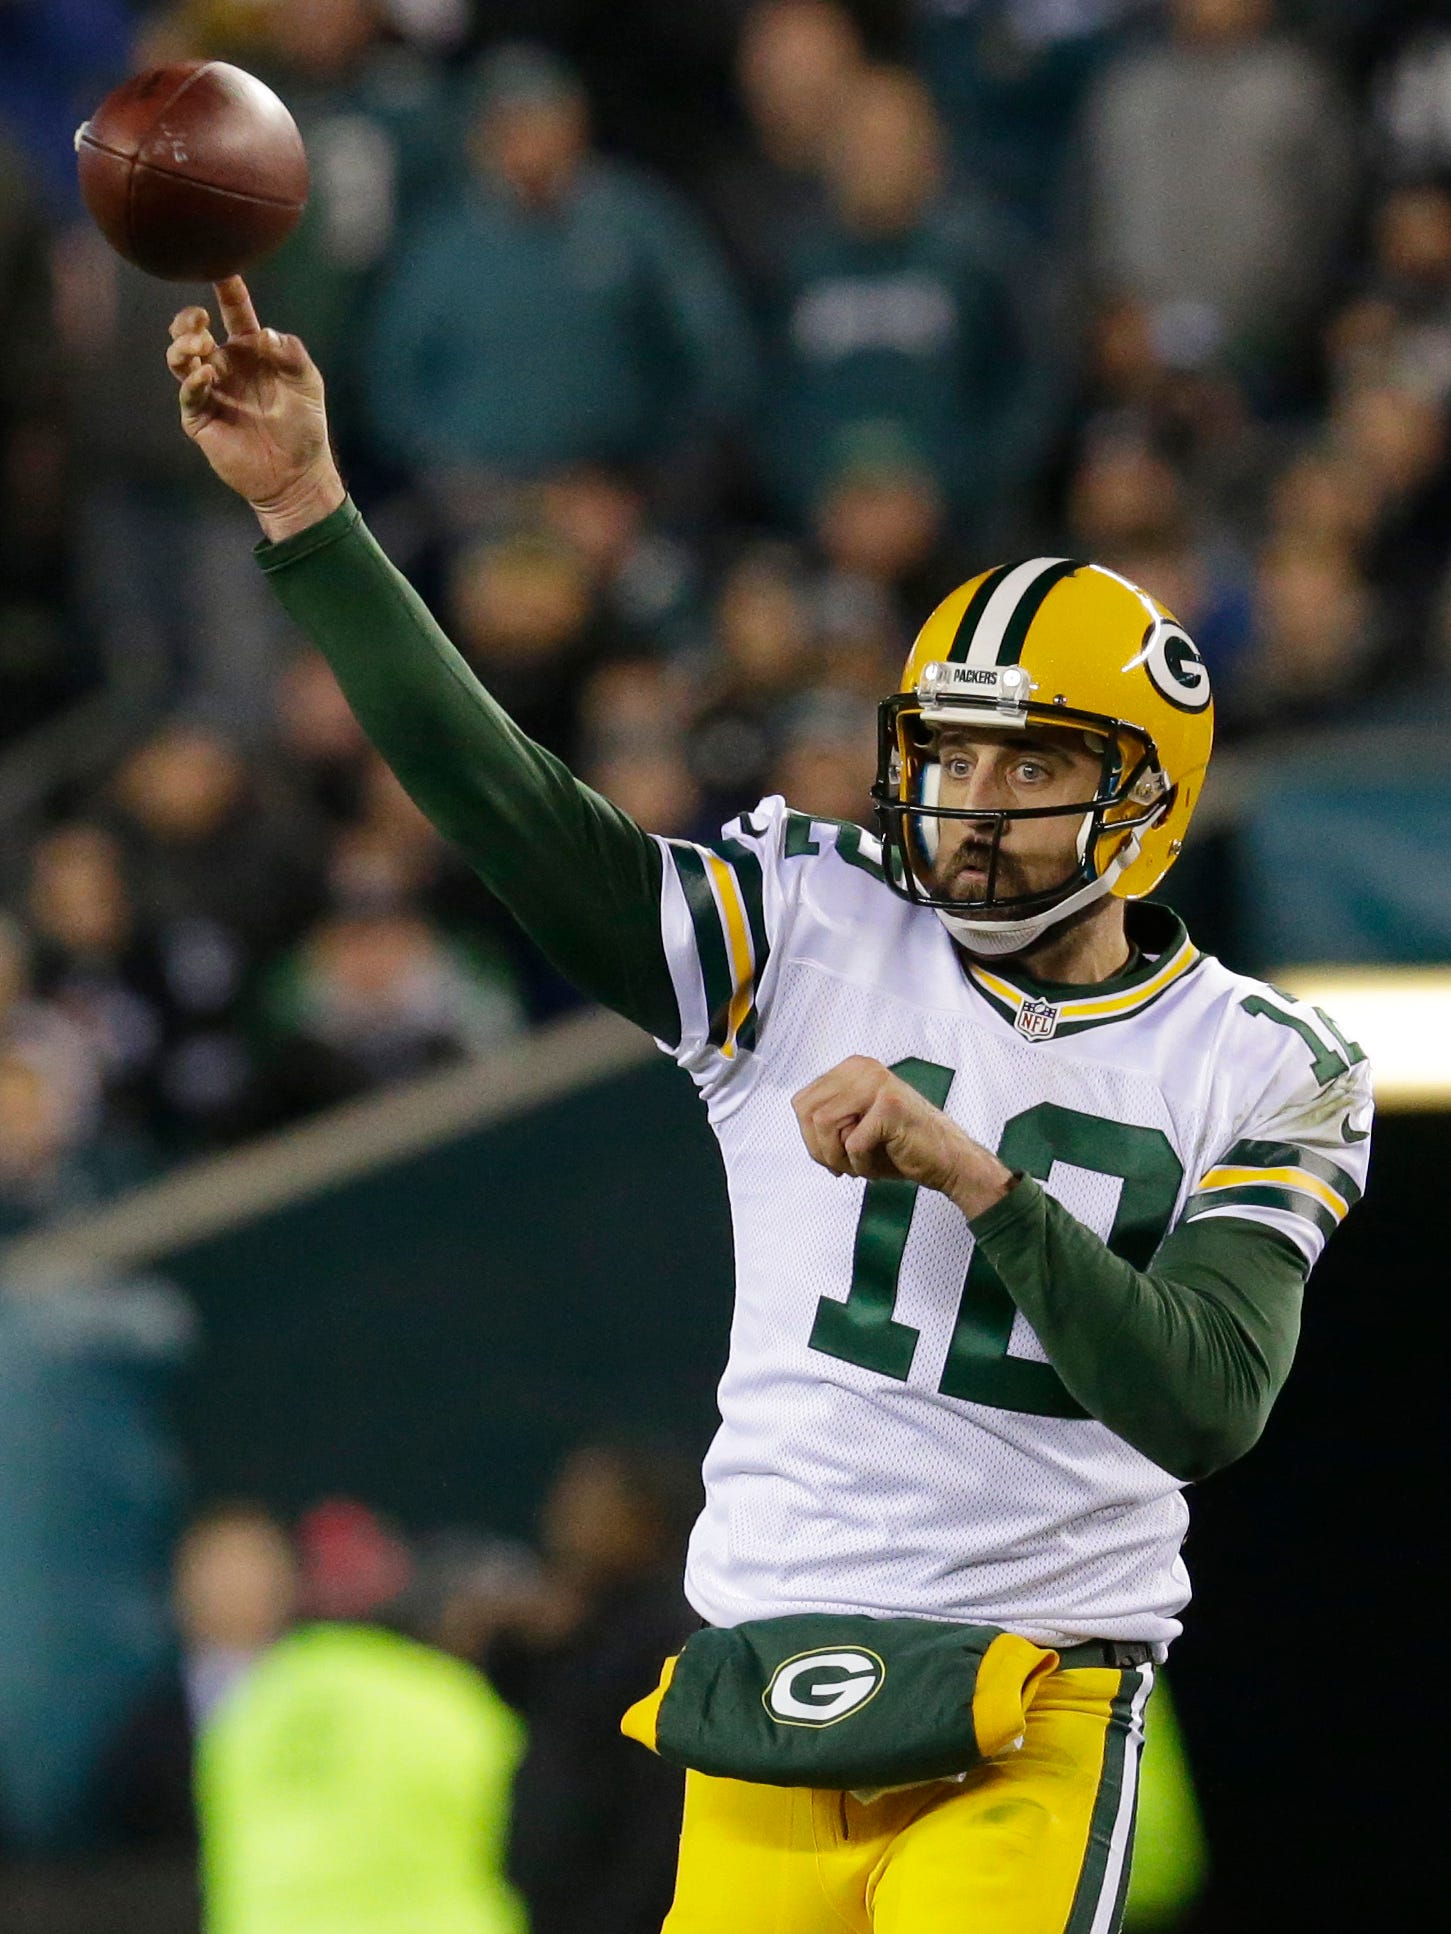 Aaron Rodgers throws a pass.